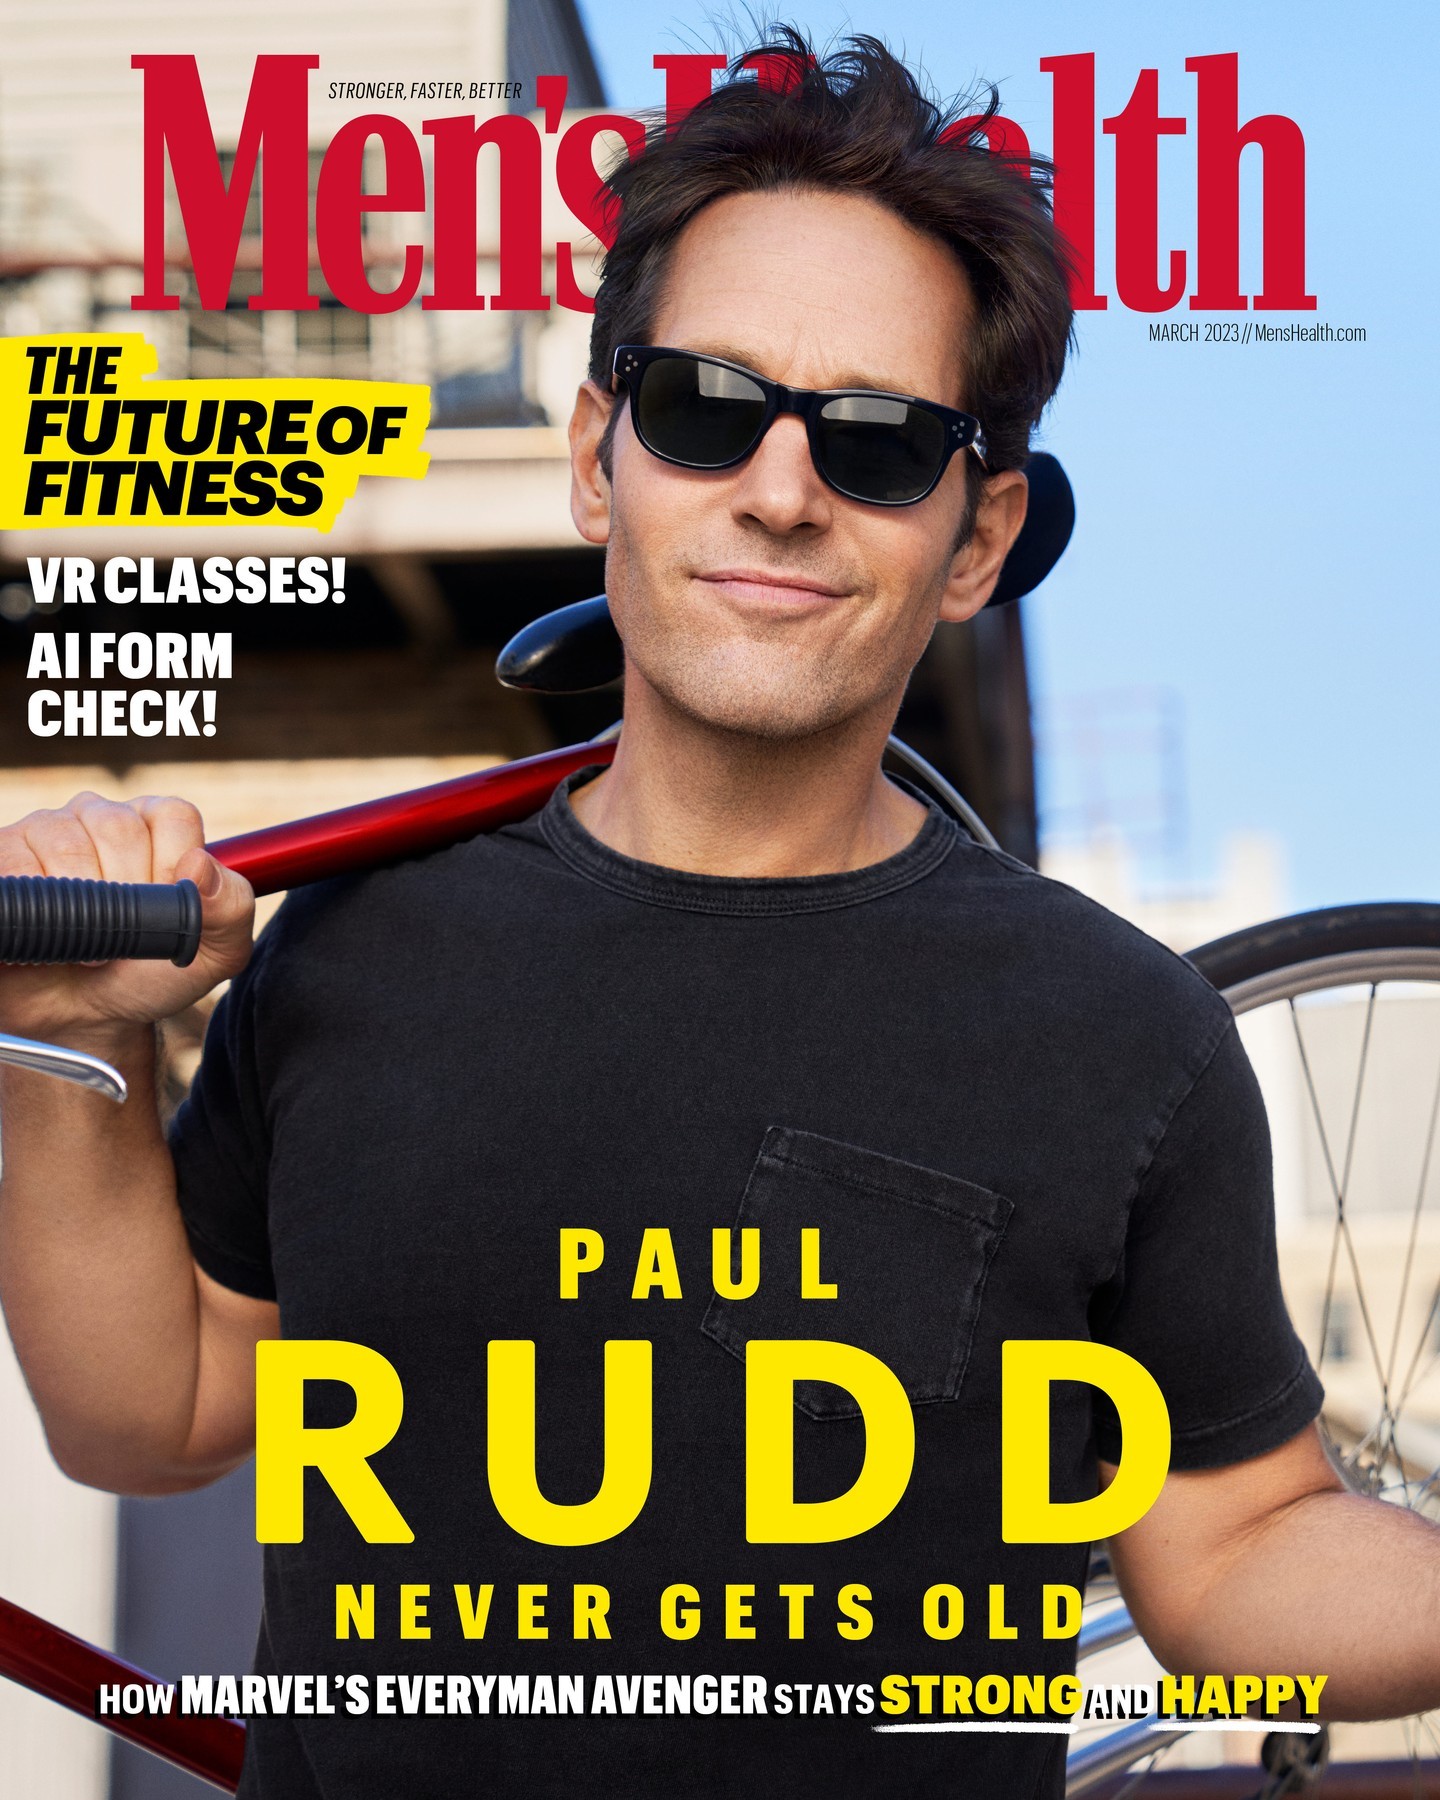 Ageless Paul Rudd doesn't drop his skincare routine in Men's Health ...